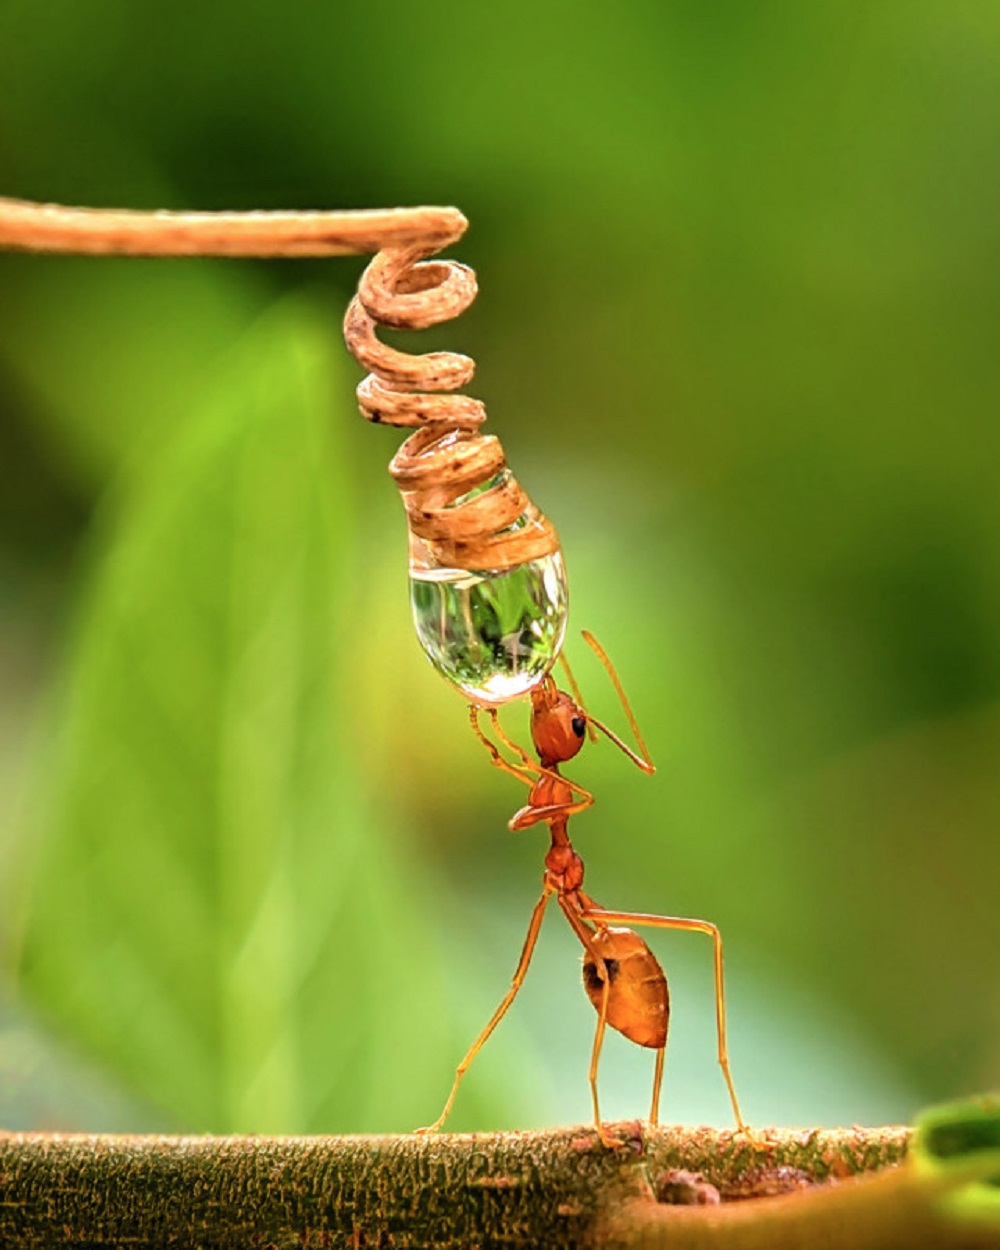 An ant sips from a water droplet